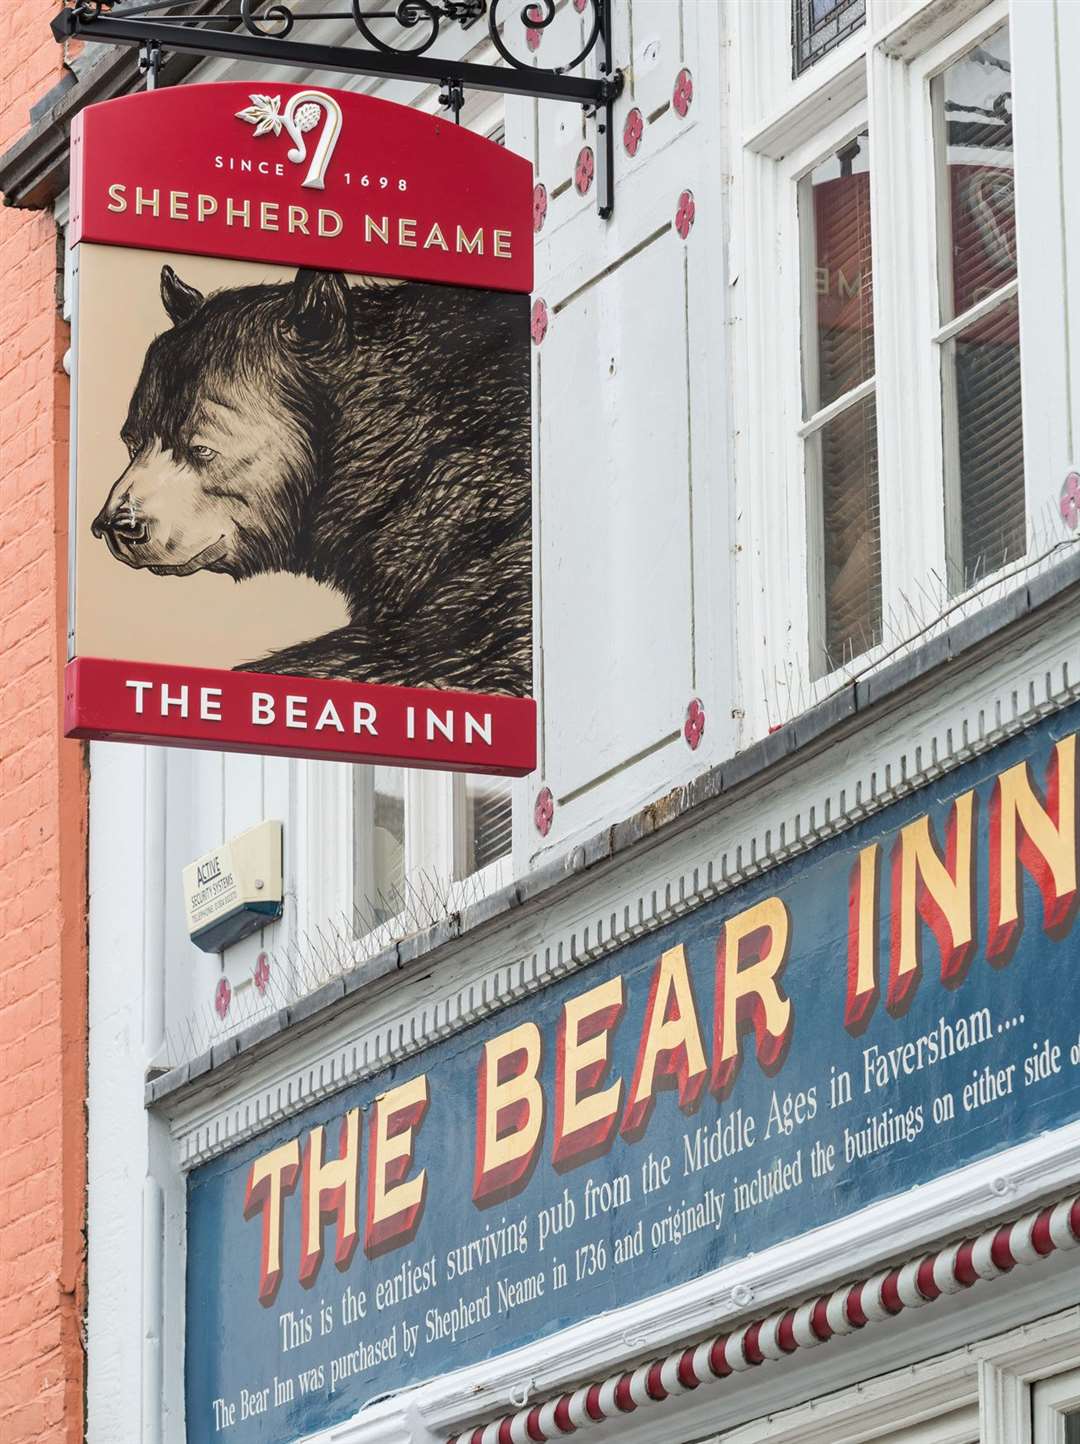 The Bear at Faversham Picture: Martin Apps